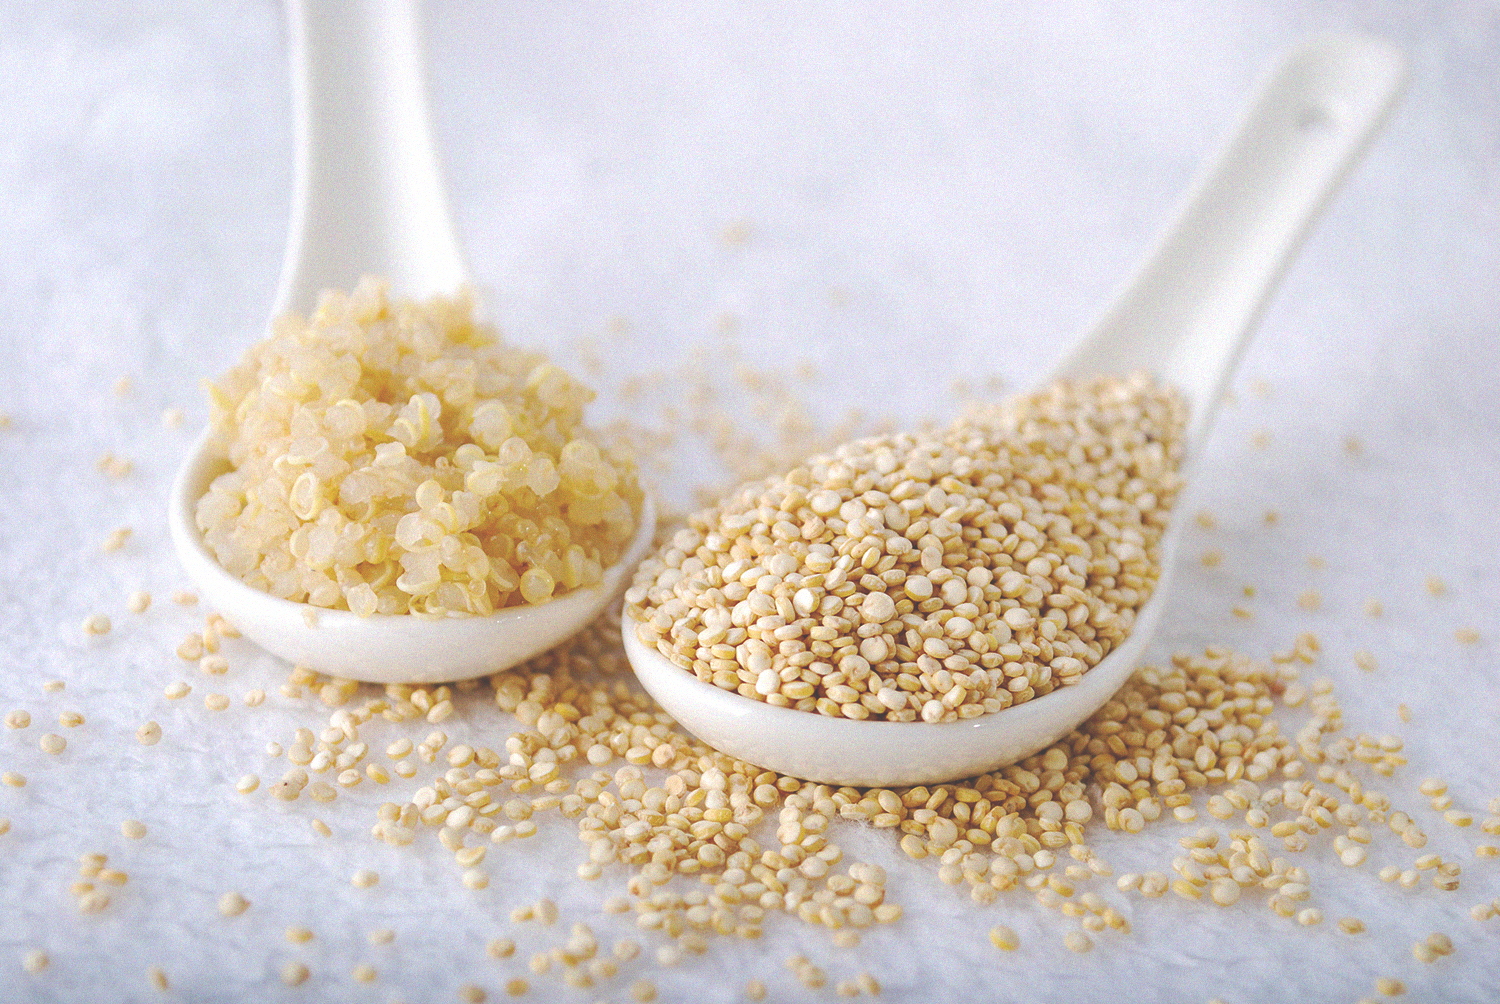 Take these secrets for making your fluffiest, tastiest quinoa yet.